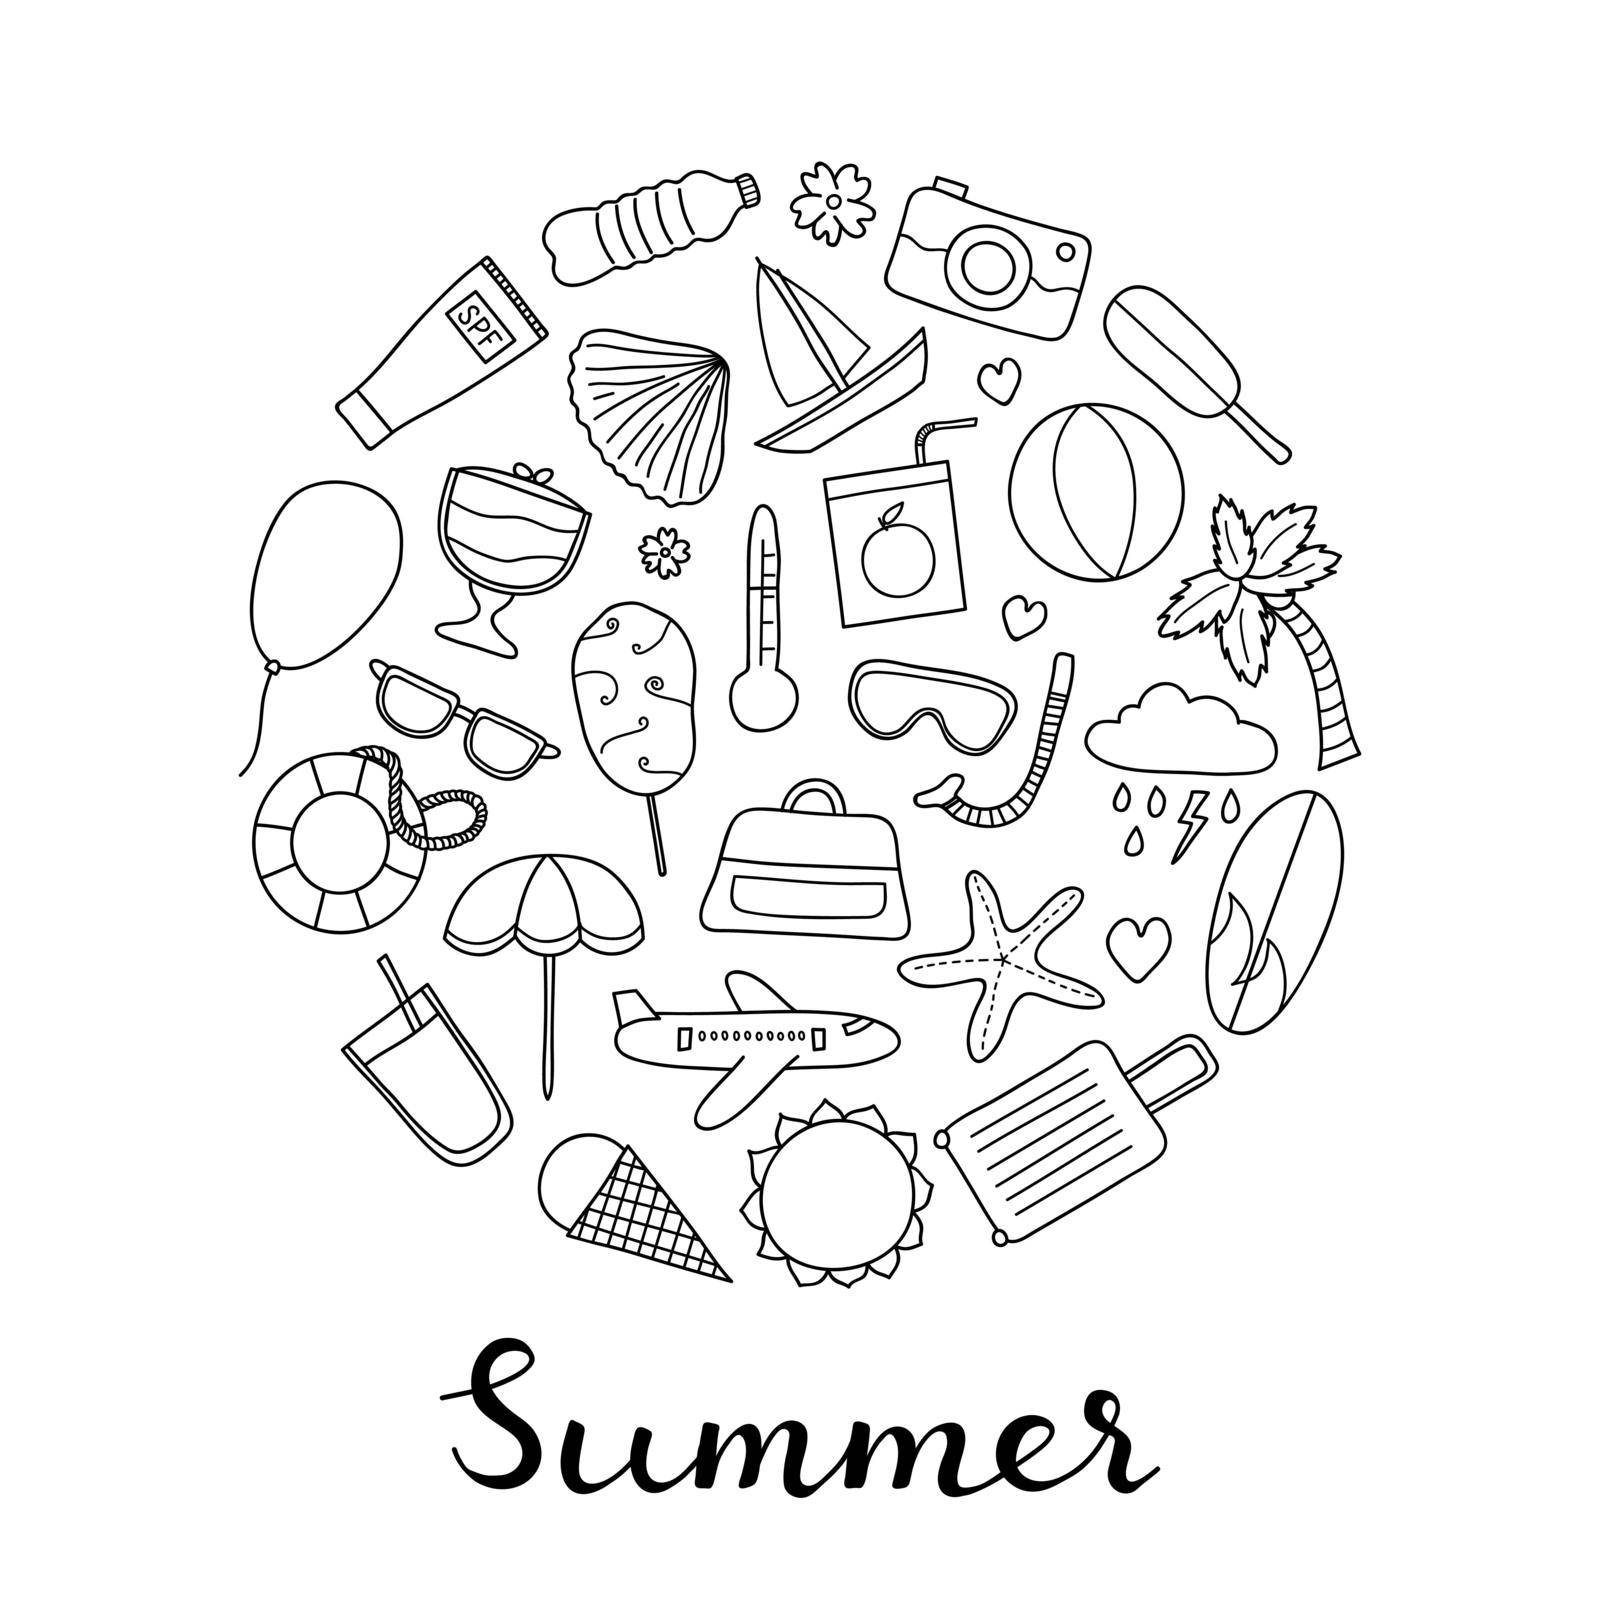 Doodle summer items in circle. by Minur